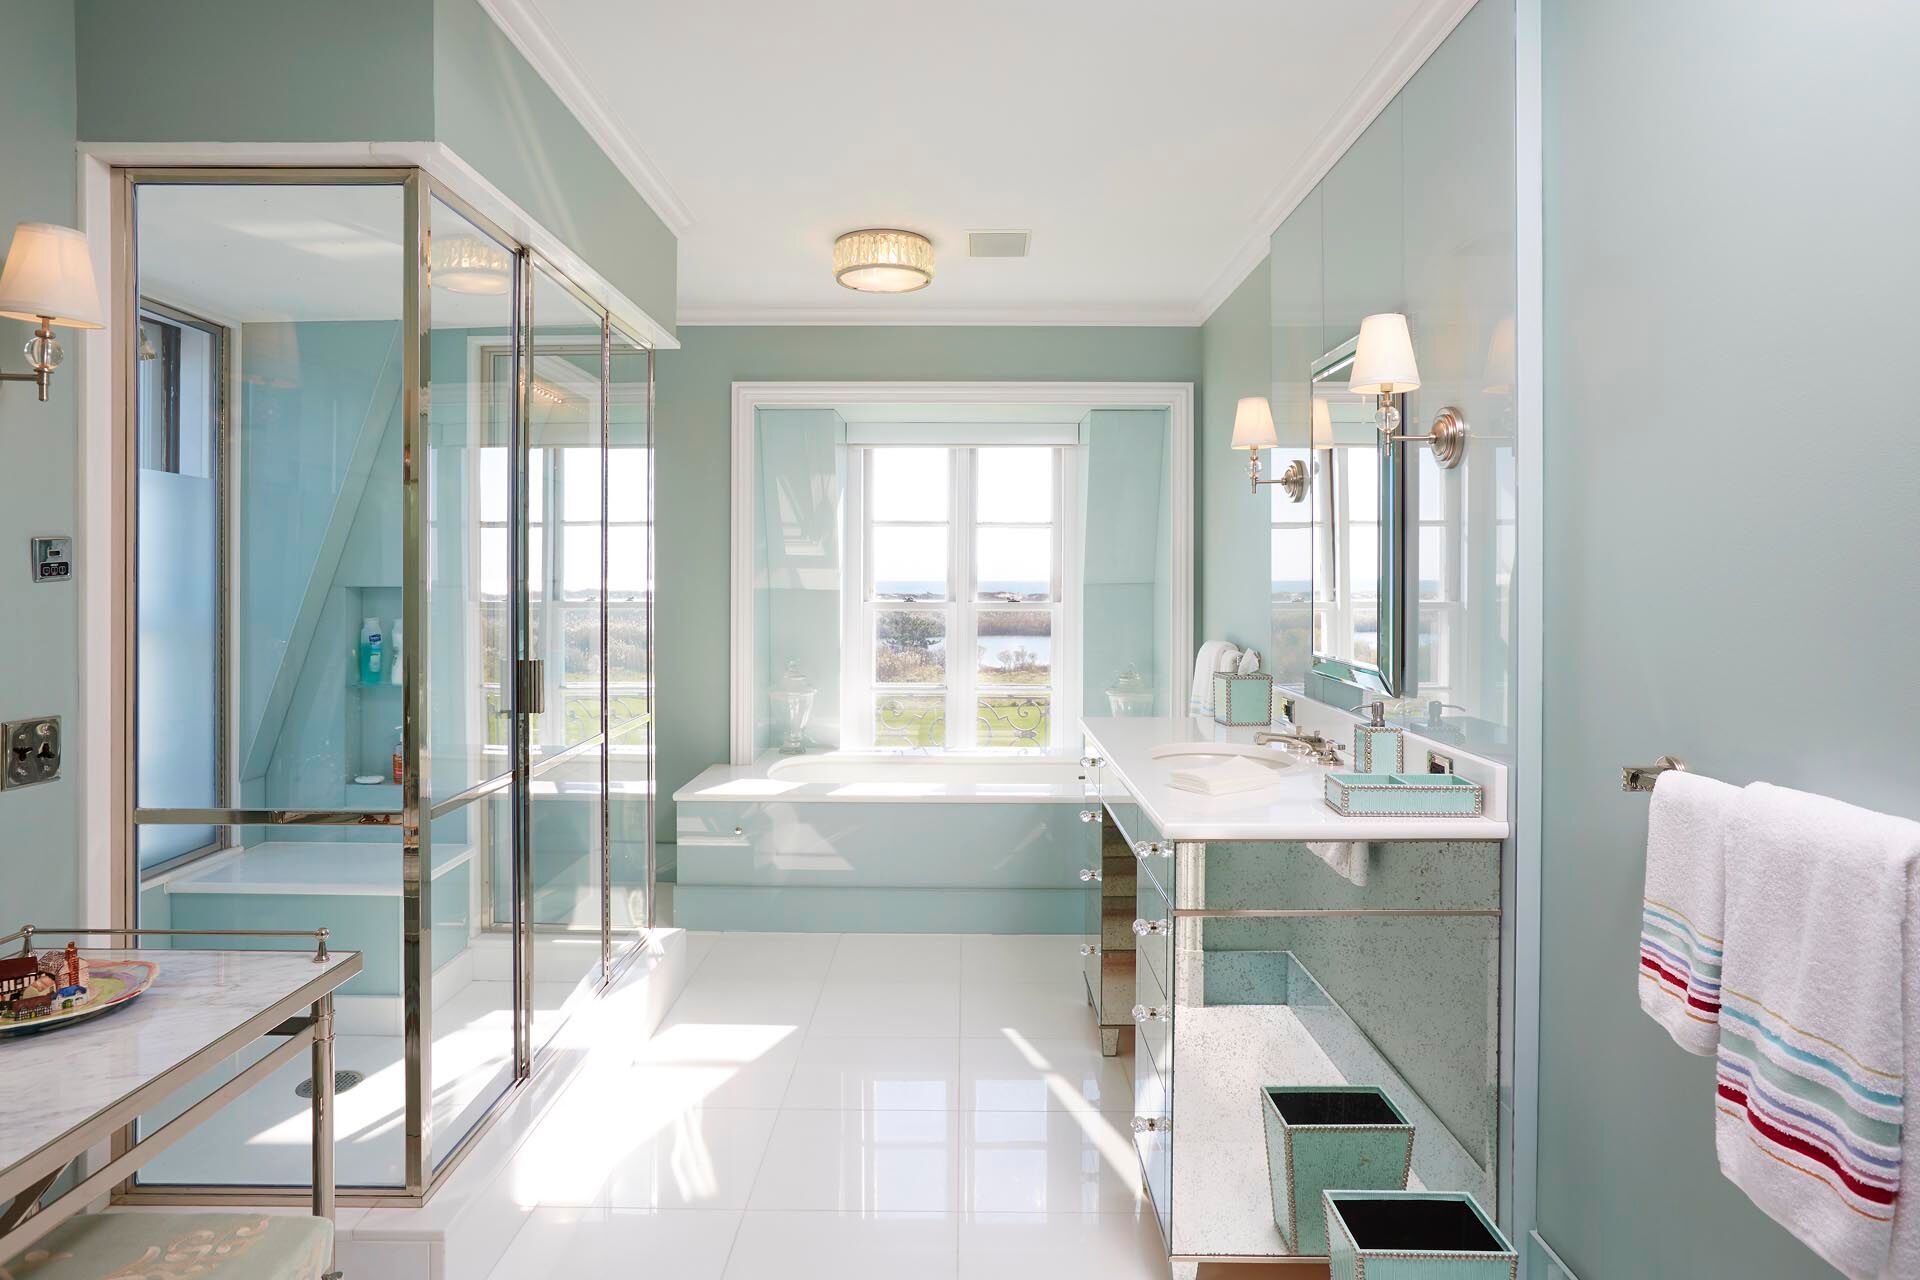 A bathroom at an estate in the Hamptons